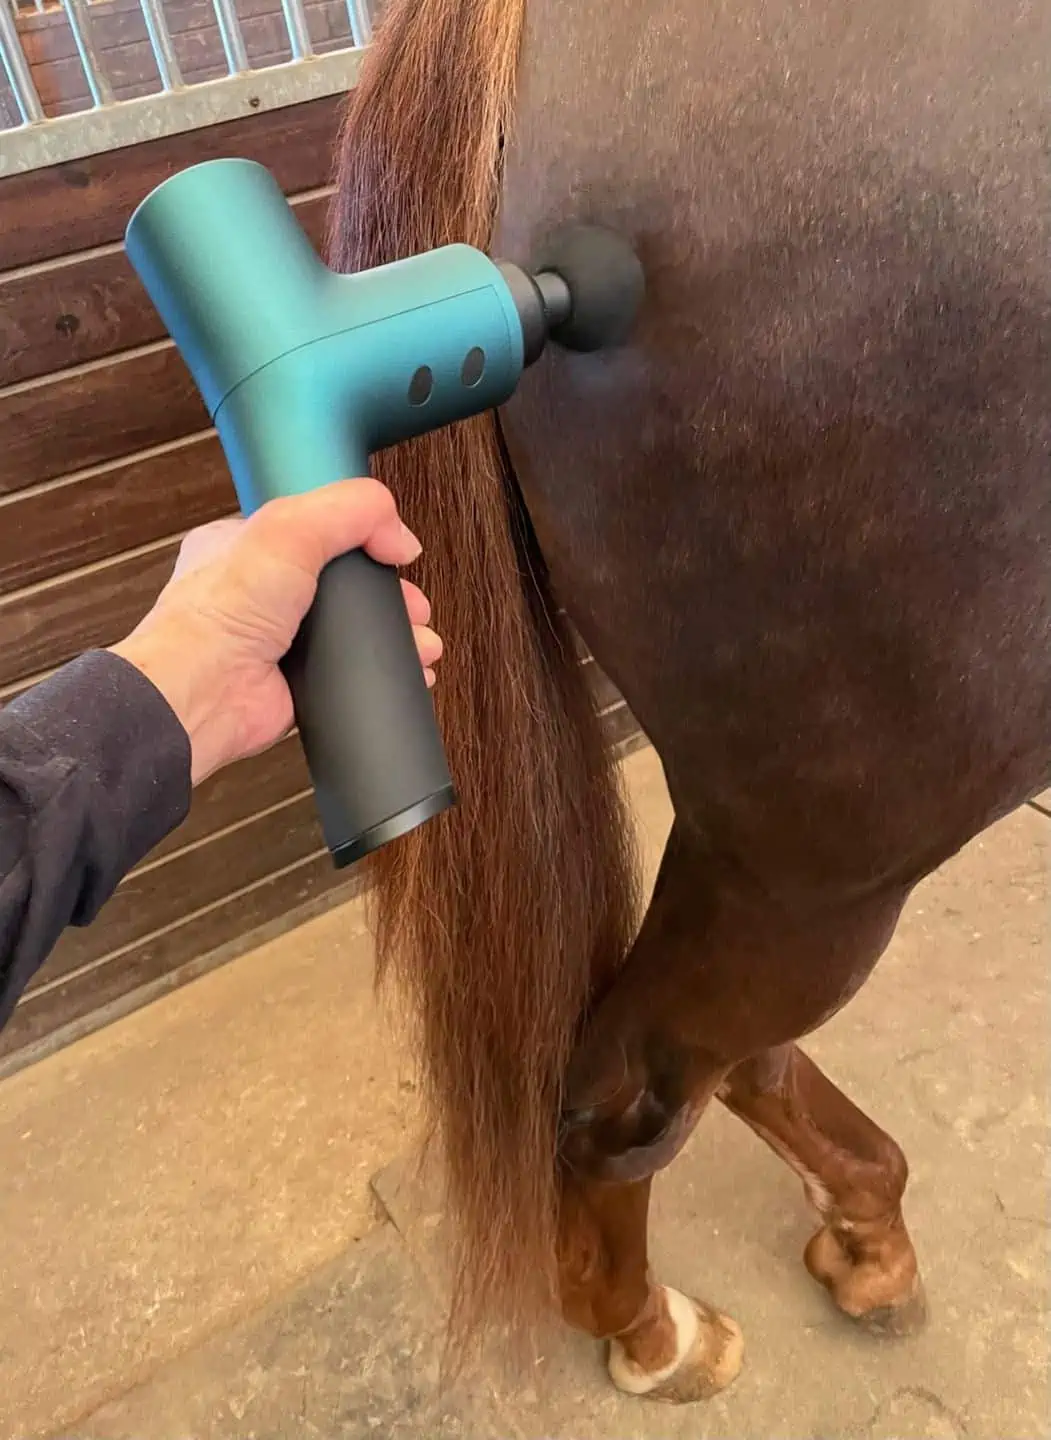 Ekrin B37 horse percussion massager in action